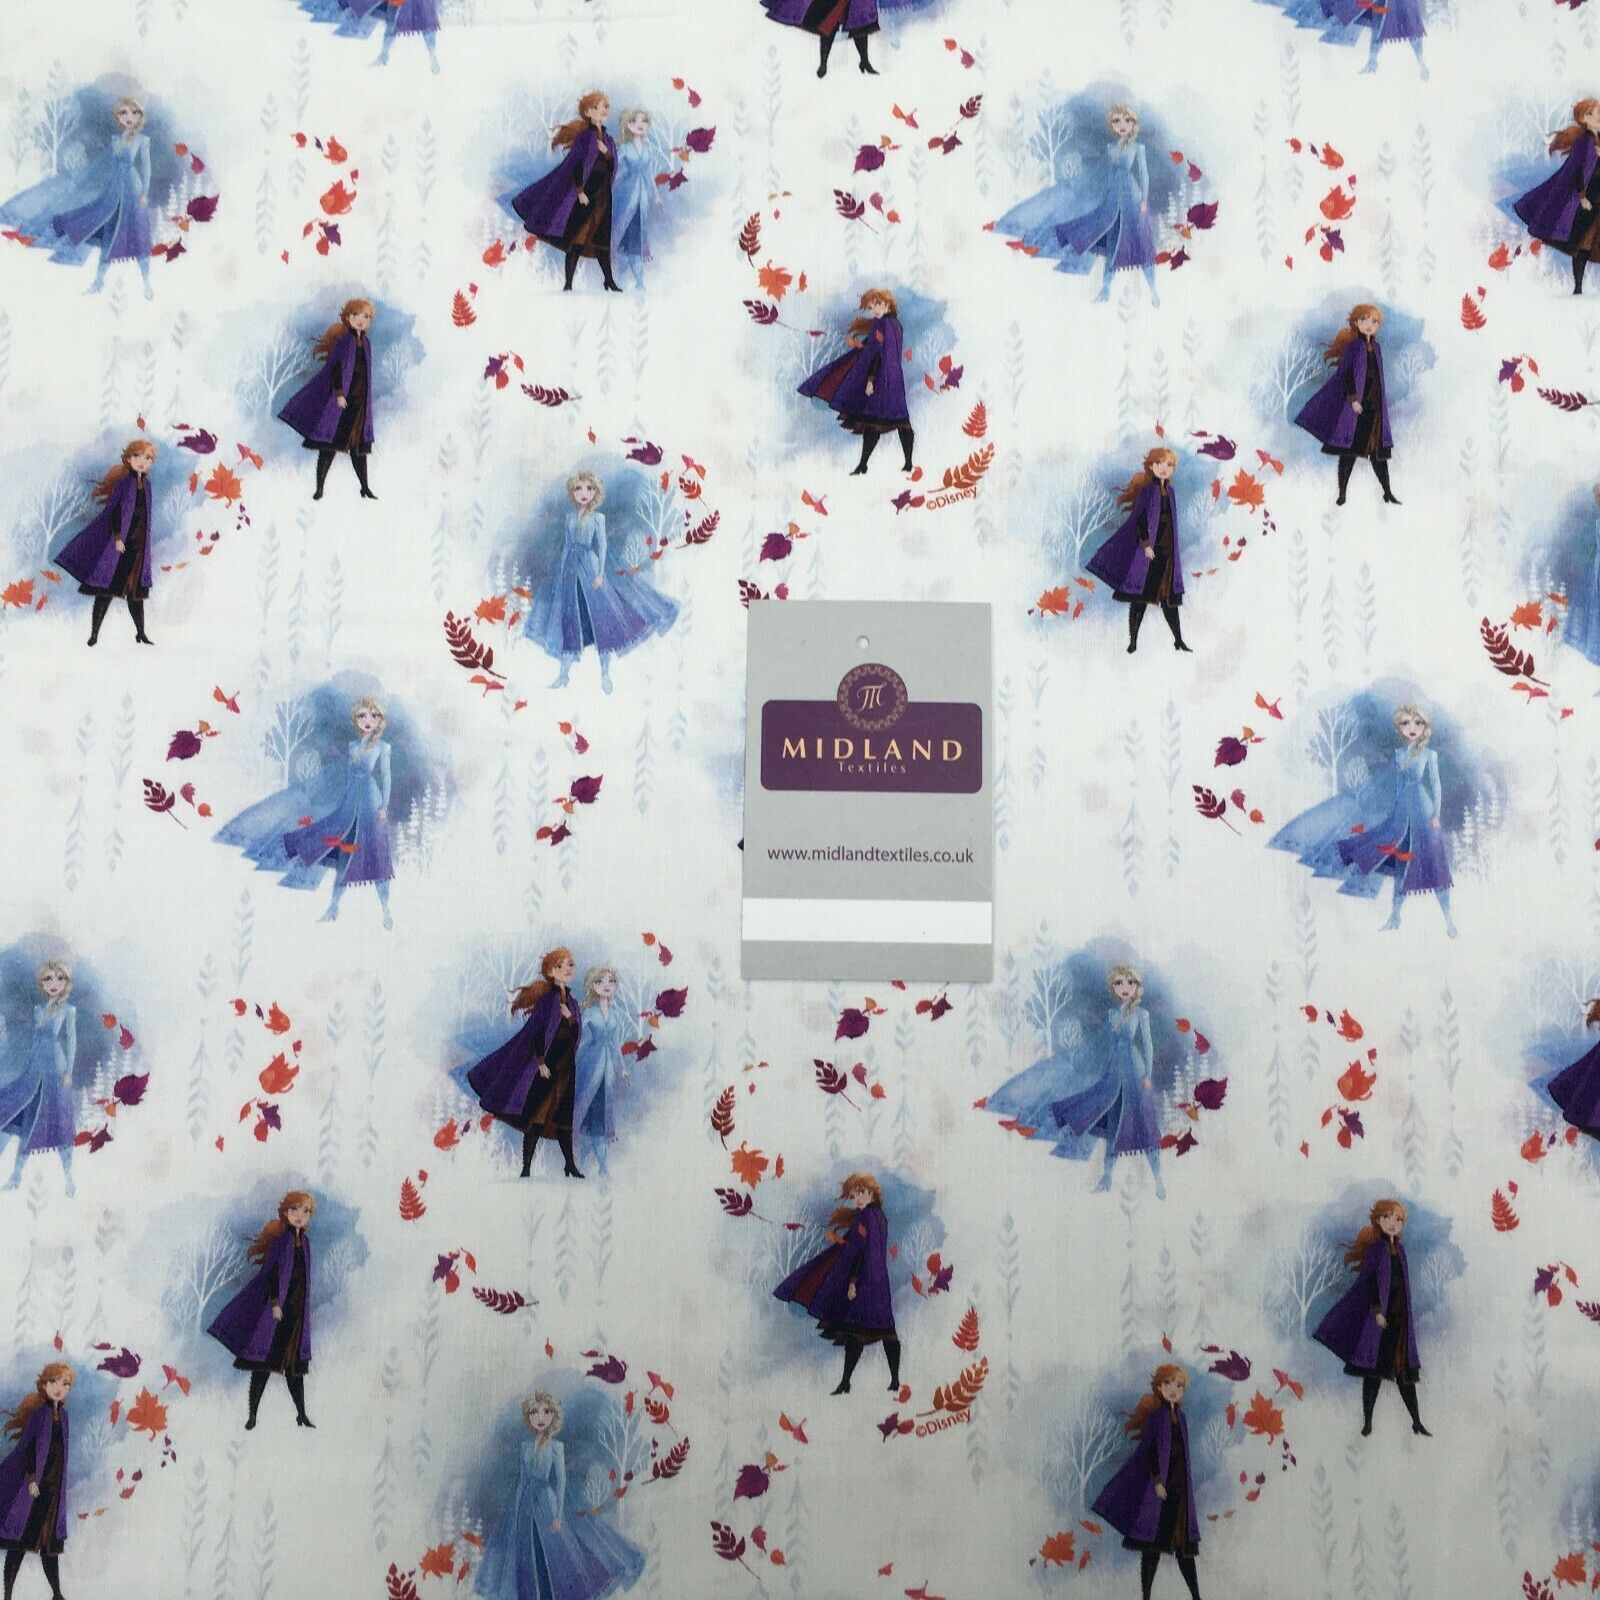 White Frozen Licensed Digital Printed 100% Cotton Fabric MH1453-2 Mtex